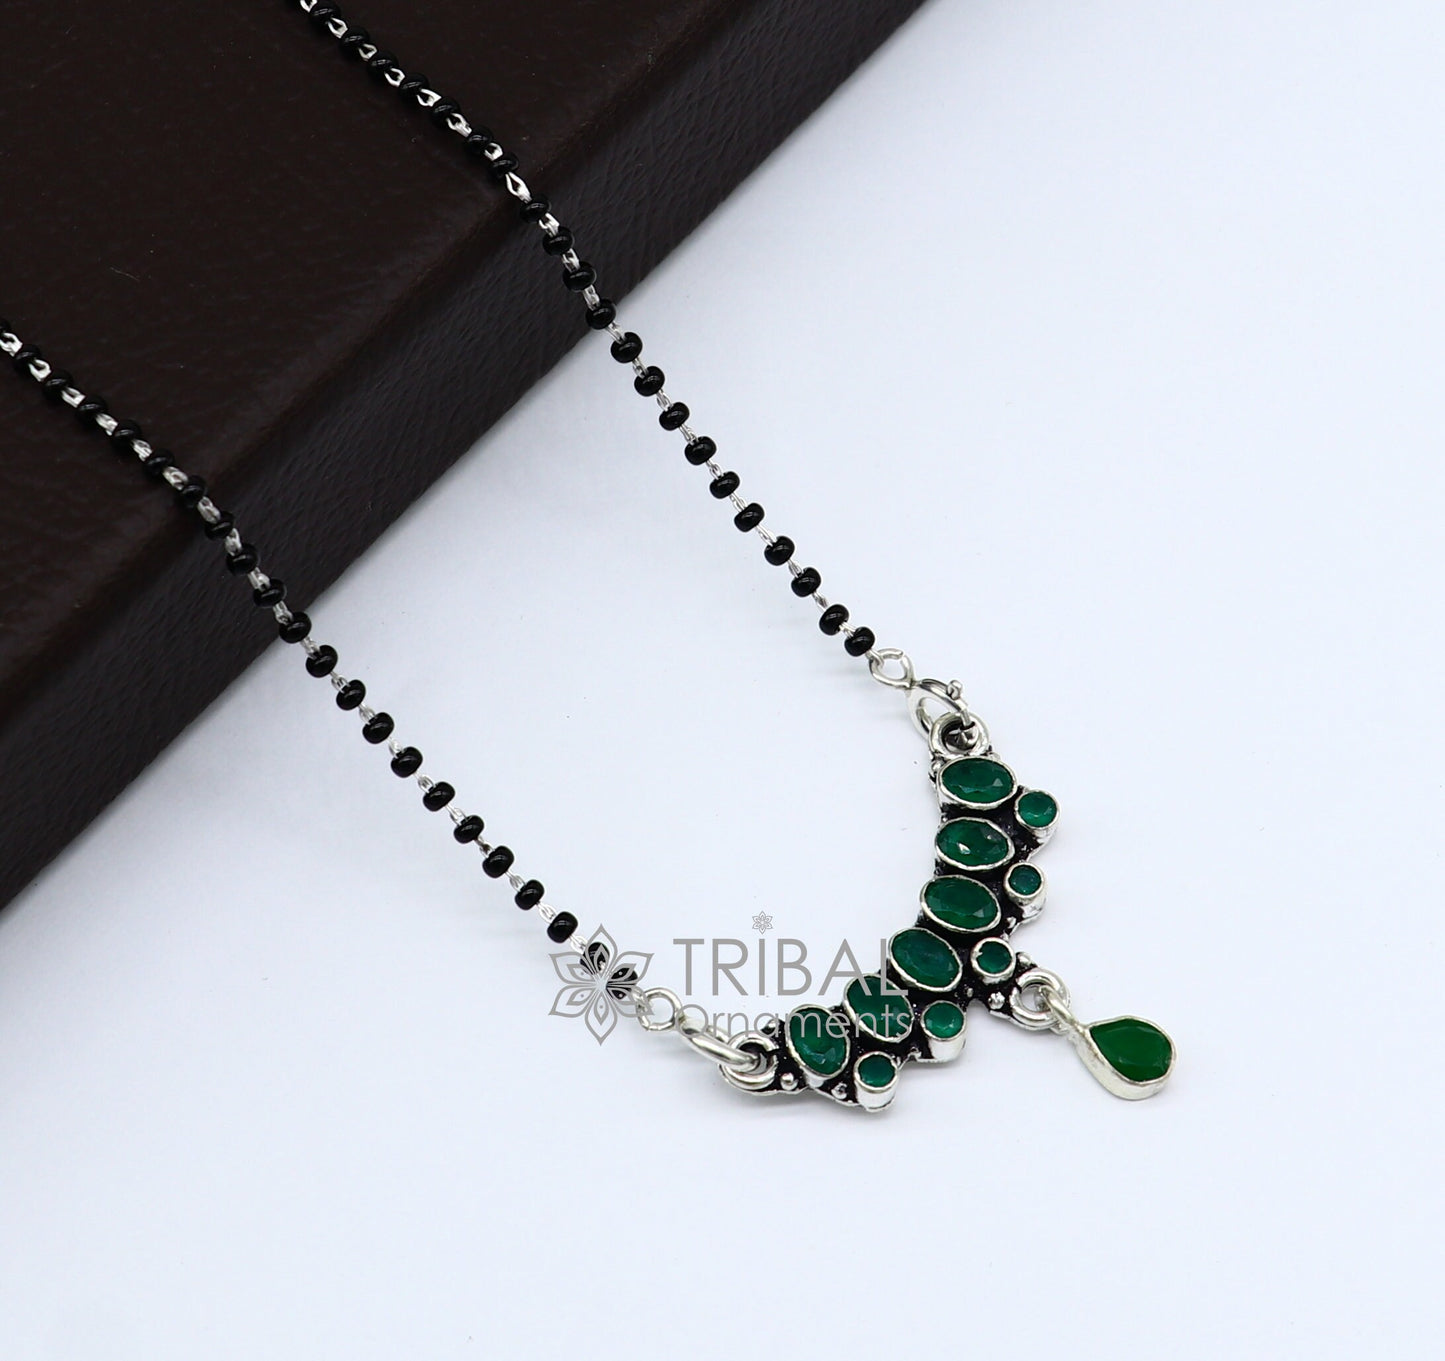 925 sterling silver black beads chain mangal sutra necklace for daily use brides Mangalsutra chunky necklace green stone pendant ms52 - TRIBAL ORNAMENTS